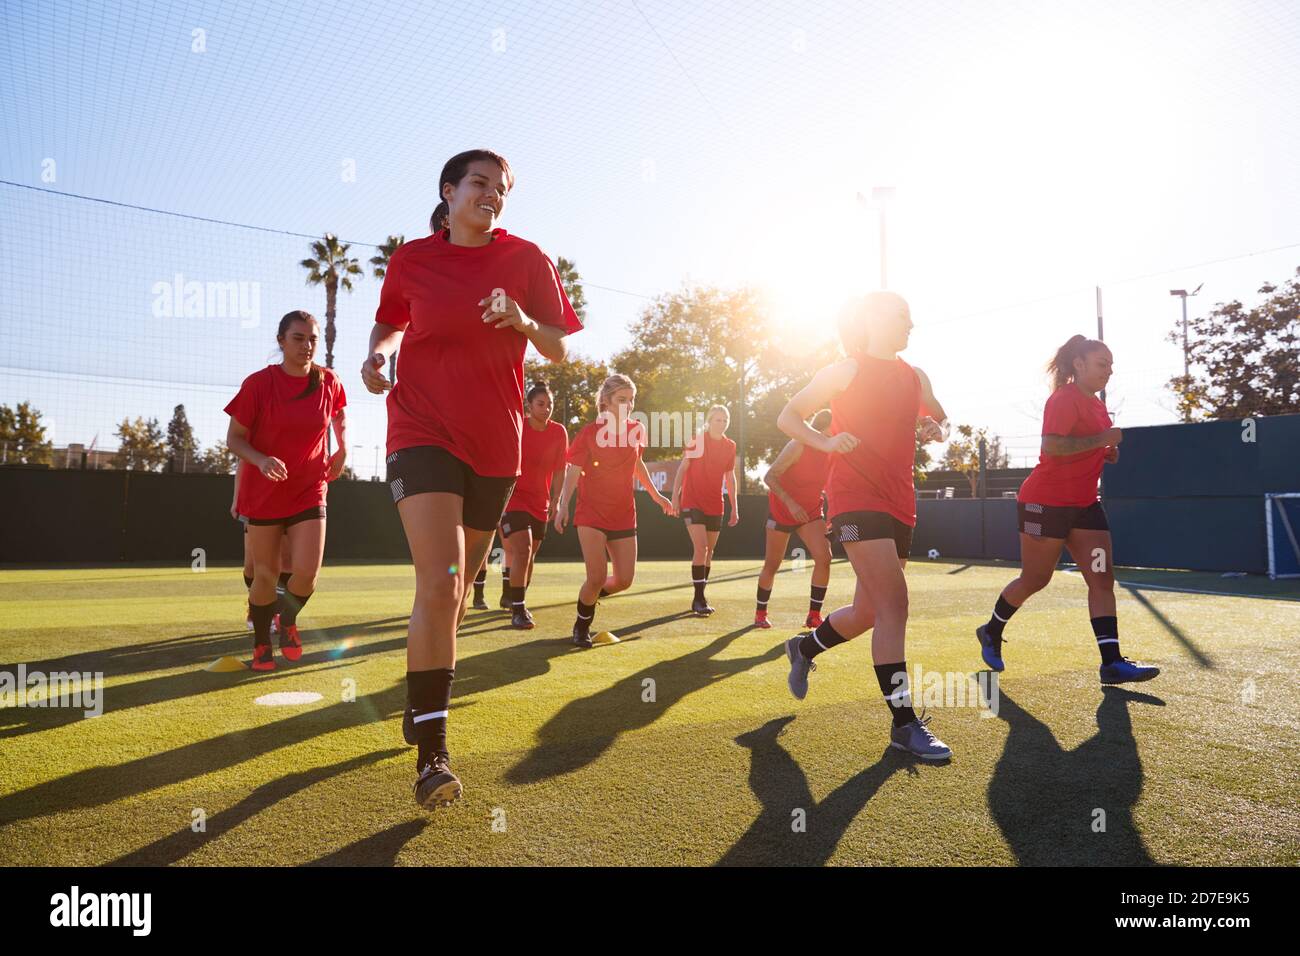 Womens Football Team Run Whilst Training For Soccer Match On Outdoor Astro  Turf Pitch Stock Photo - Alamy